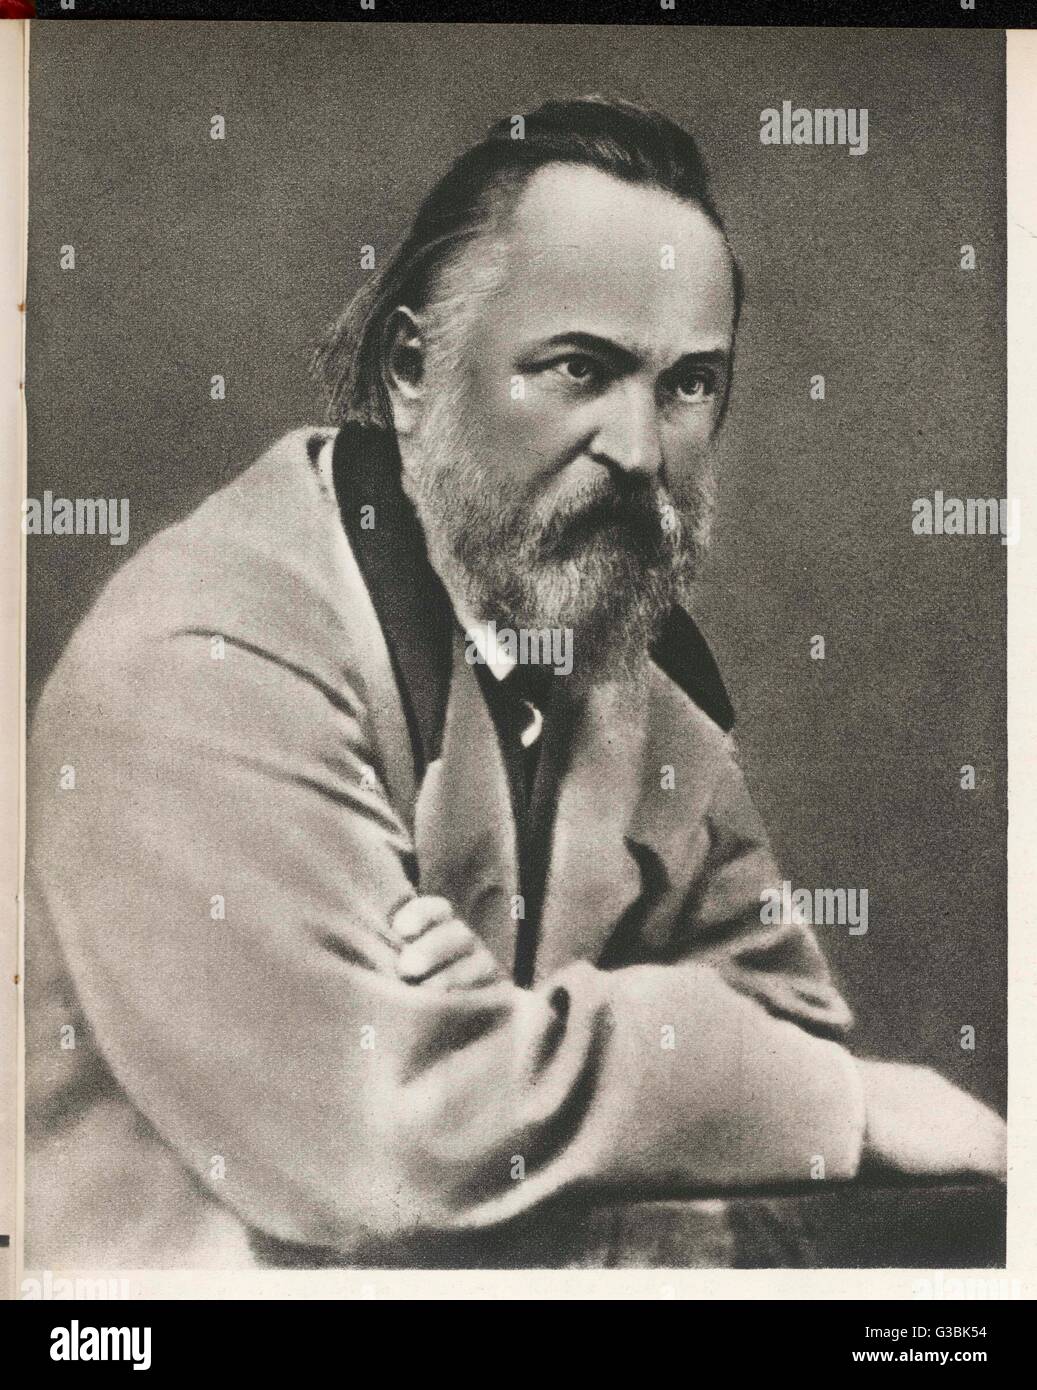 ALEXANDER HERZEN Russian revolutionary, editor  and writer, son of nobleman,  exiled in the west, espoused  socialist principles.       Date: 1812 - 1870 Stock Photo